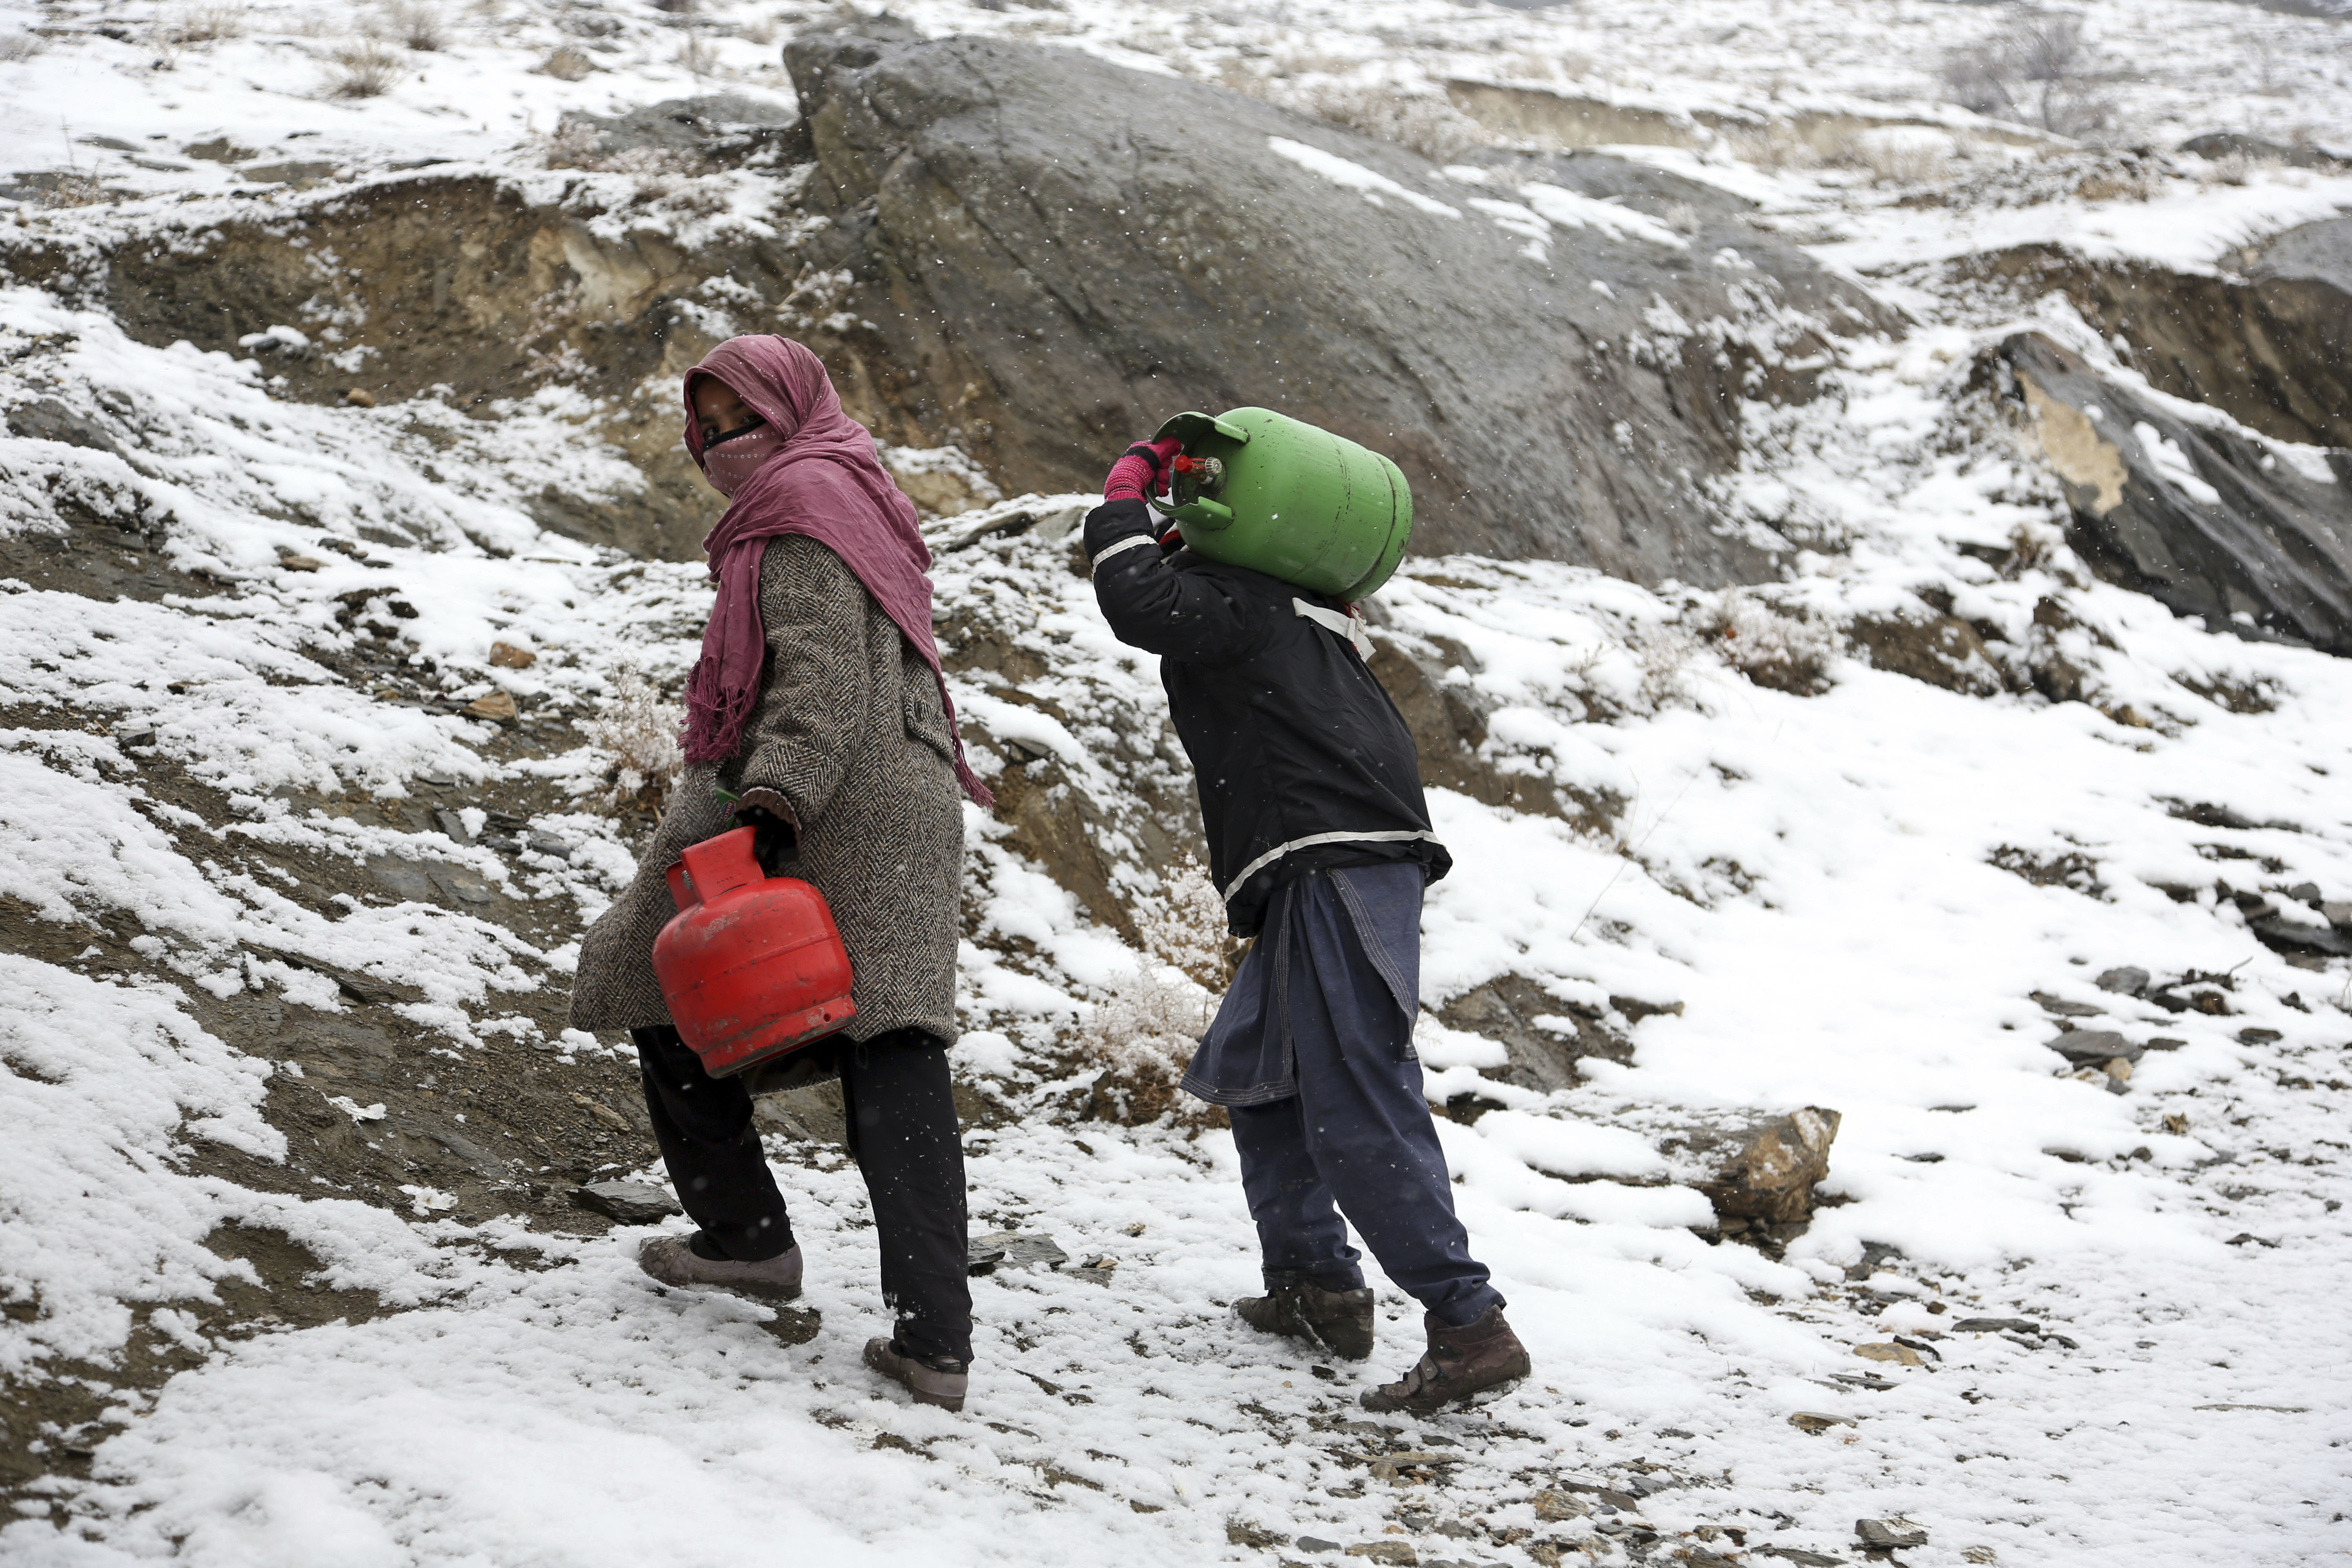 An Afghan boy and girl carry gas cylinders during a snowfall, on the outskirts of Kabul, Afghanistan, Wednesday, Jan. 31, 2018. (AP Photo/Rahmat Gul)